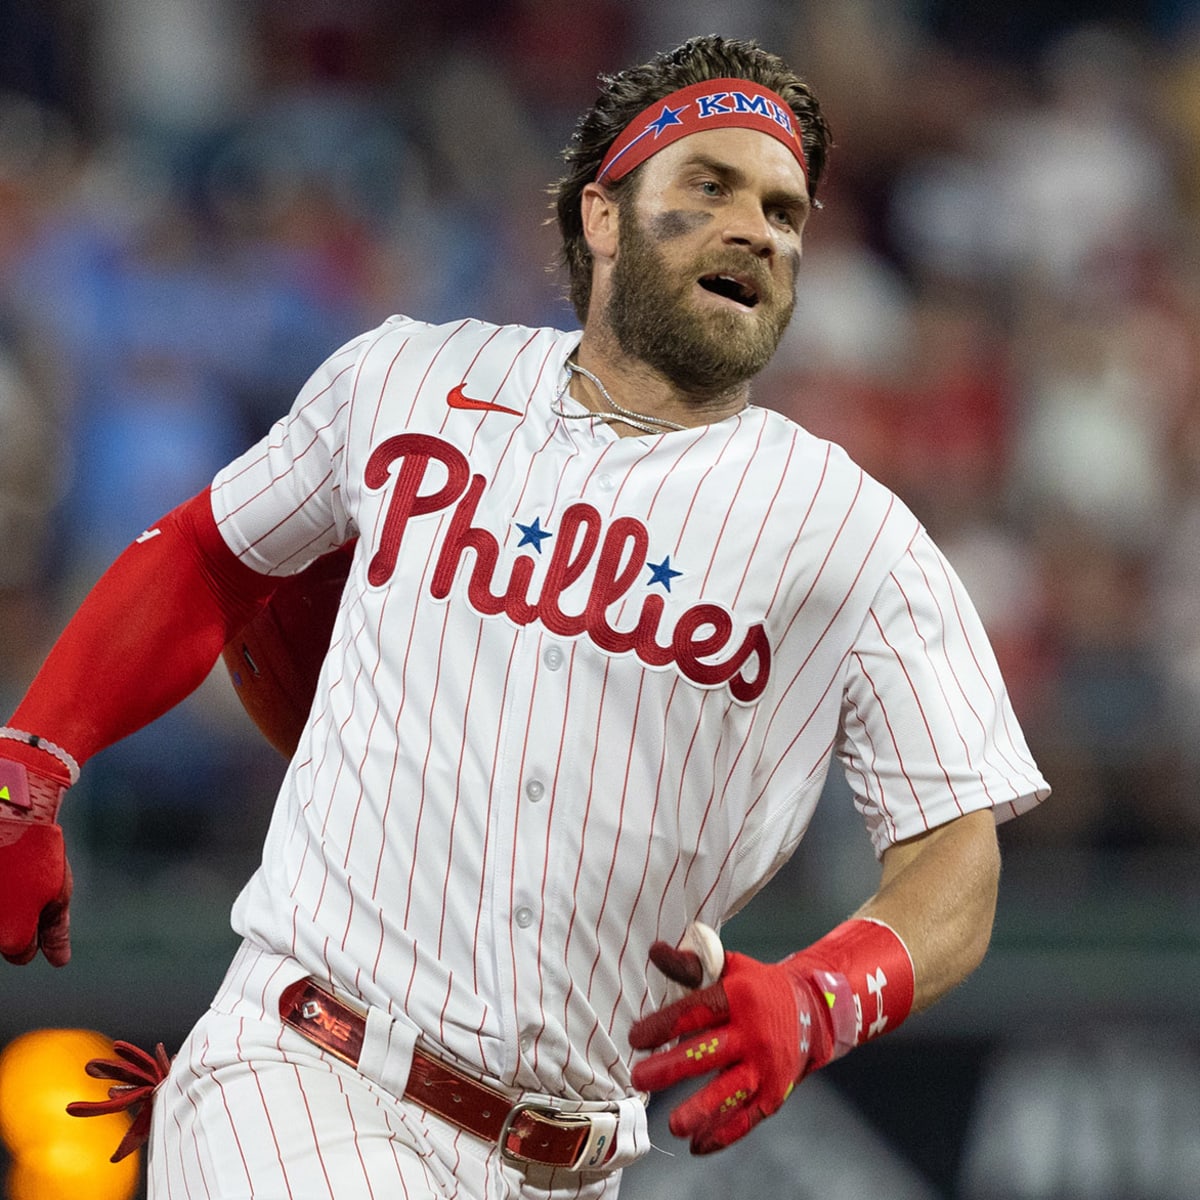 Bryce Harper, the capeless hero who led the Phillies to the World